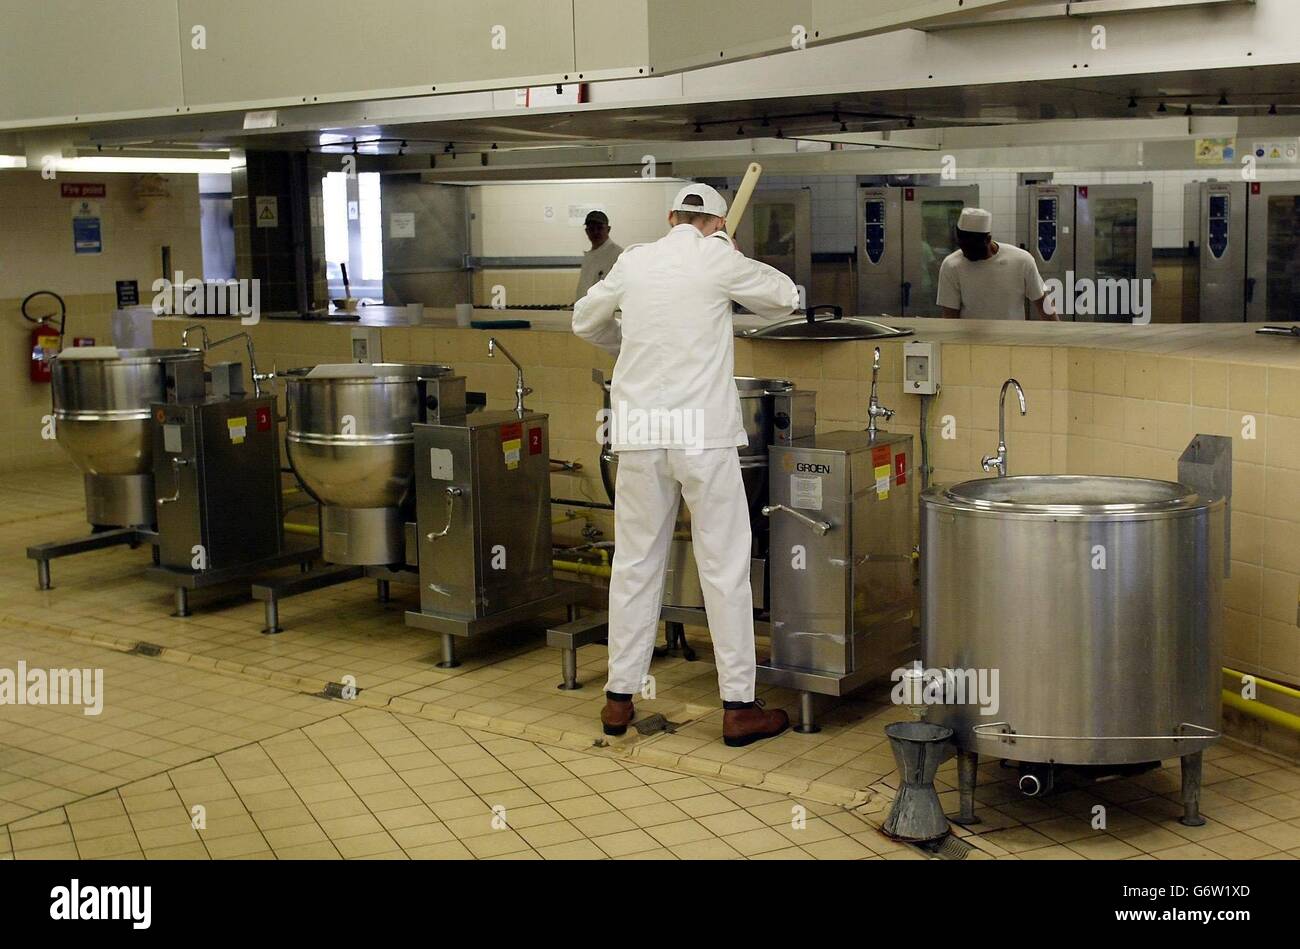 The kitchens at Wakefield Prison, West Yorkshire. Prison staff at Wakefield, which holds 570 inmates, 70% of whom are serving life and 20% serving 10 years or more, were criticised for their 'disrespectful' attitude to offenders in their care. Chief Inspector of Prisons Anne Owers found there was an 'extremely high' number of complaints from inmates about bullying, although they added that procedures to deal with the complaints were thorough. Stock Photo